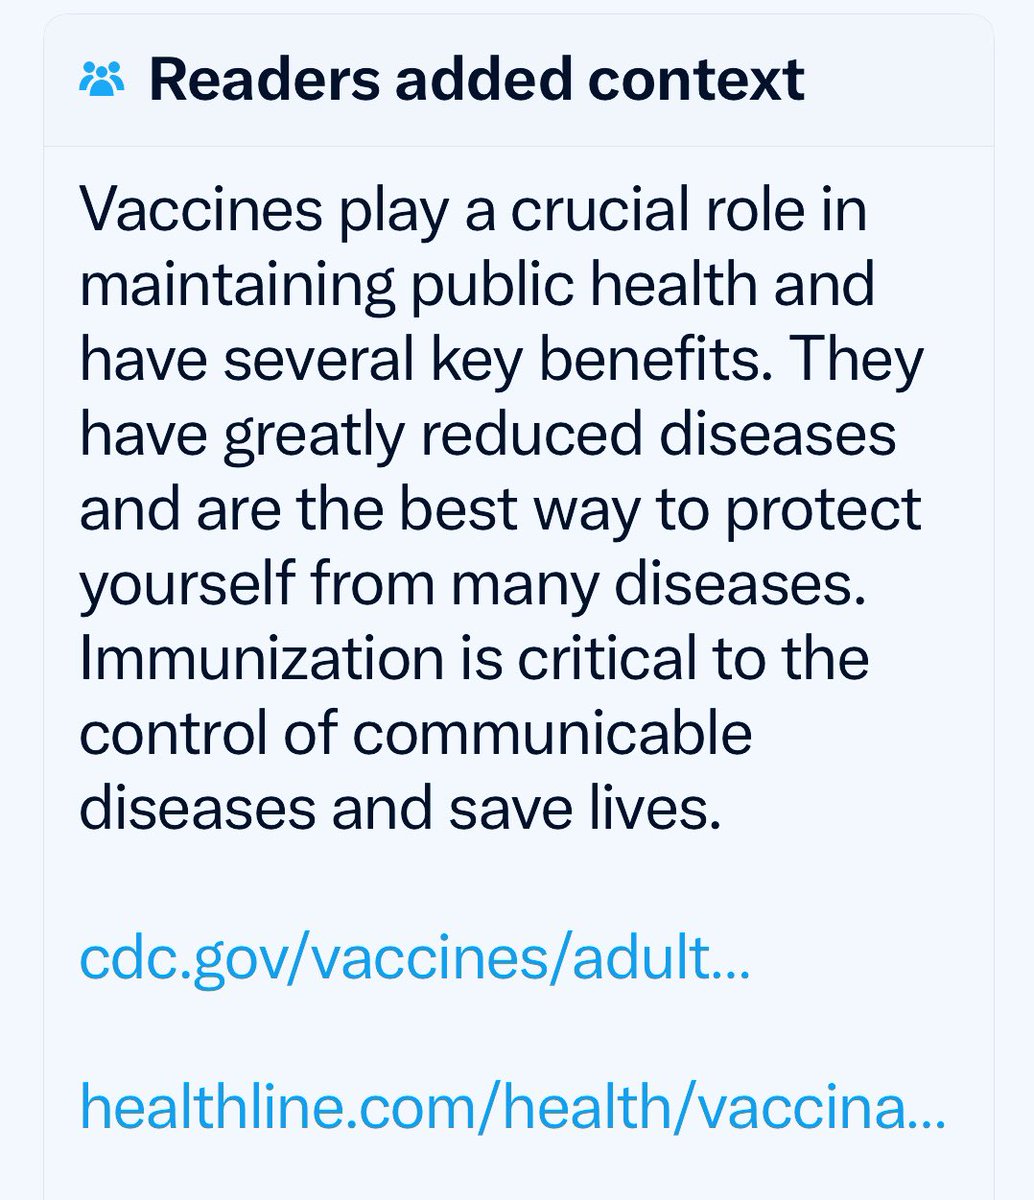 Vaccines never saved us, don’t confer immunity, don’t stop transmission, don’t stop death, while causing asthma, eczema, allergies, autoimmune disorders, seizures, autism and dozens of other ailments, including death. Vaccines play a crucial role in the destruction of humanity.